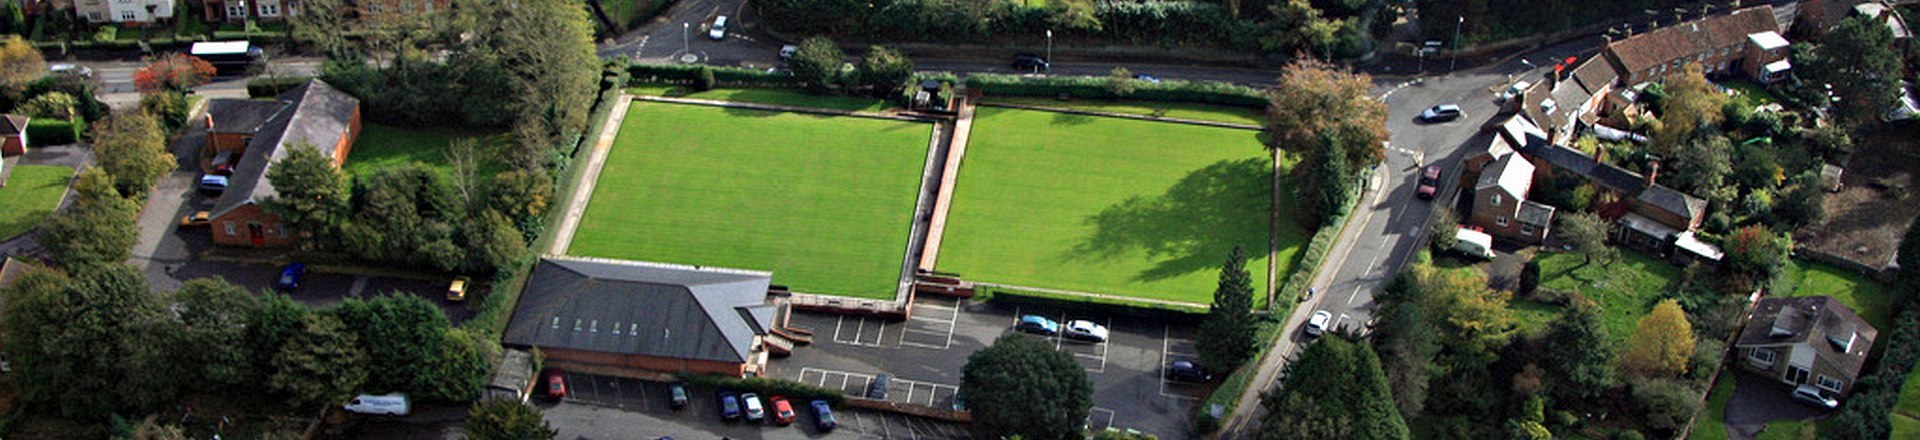 Wiltshire’s central two green bowling club